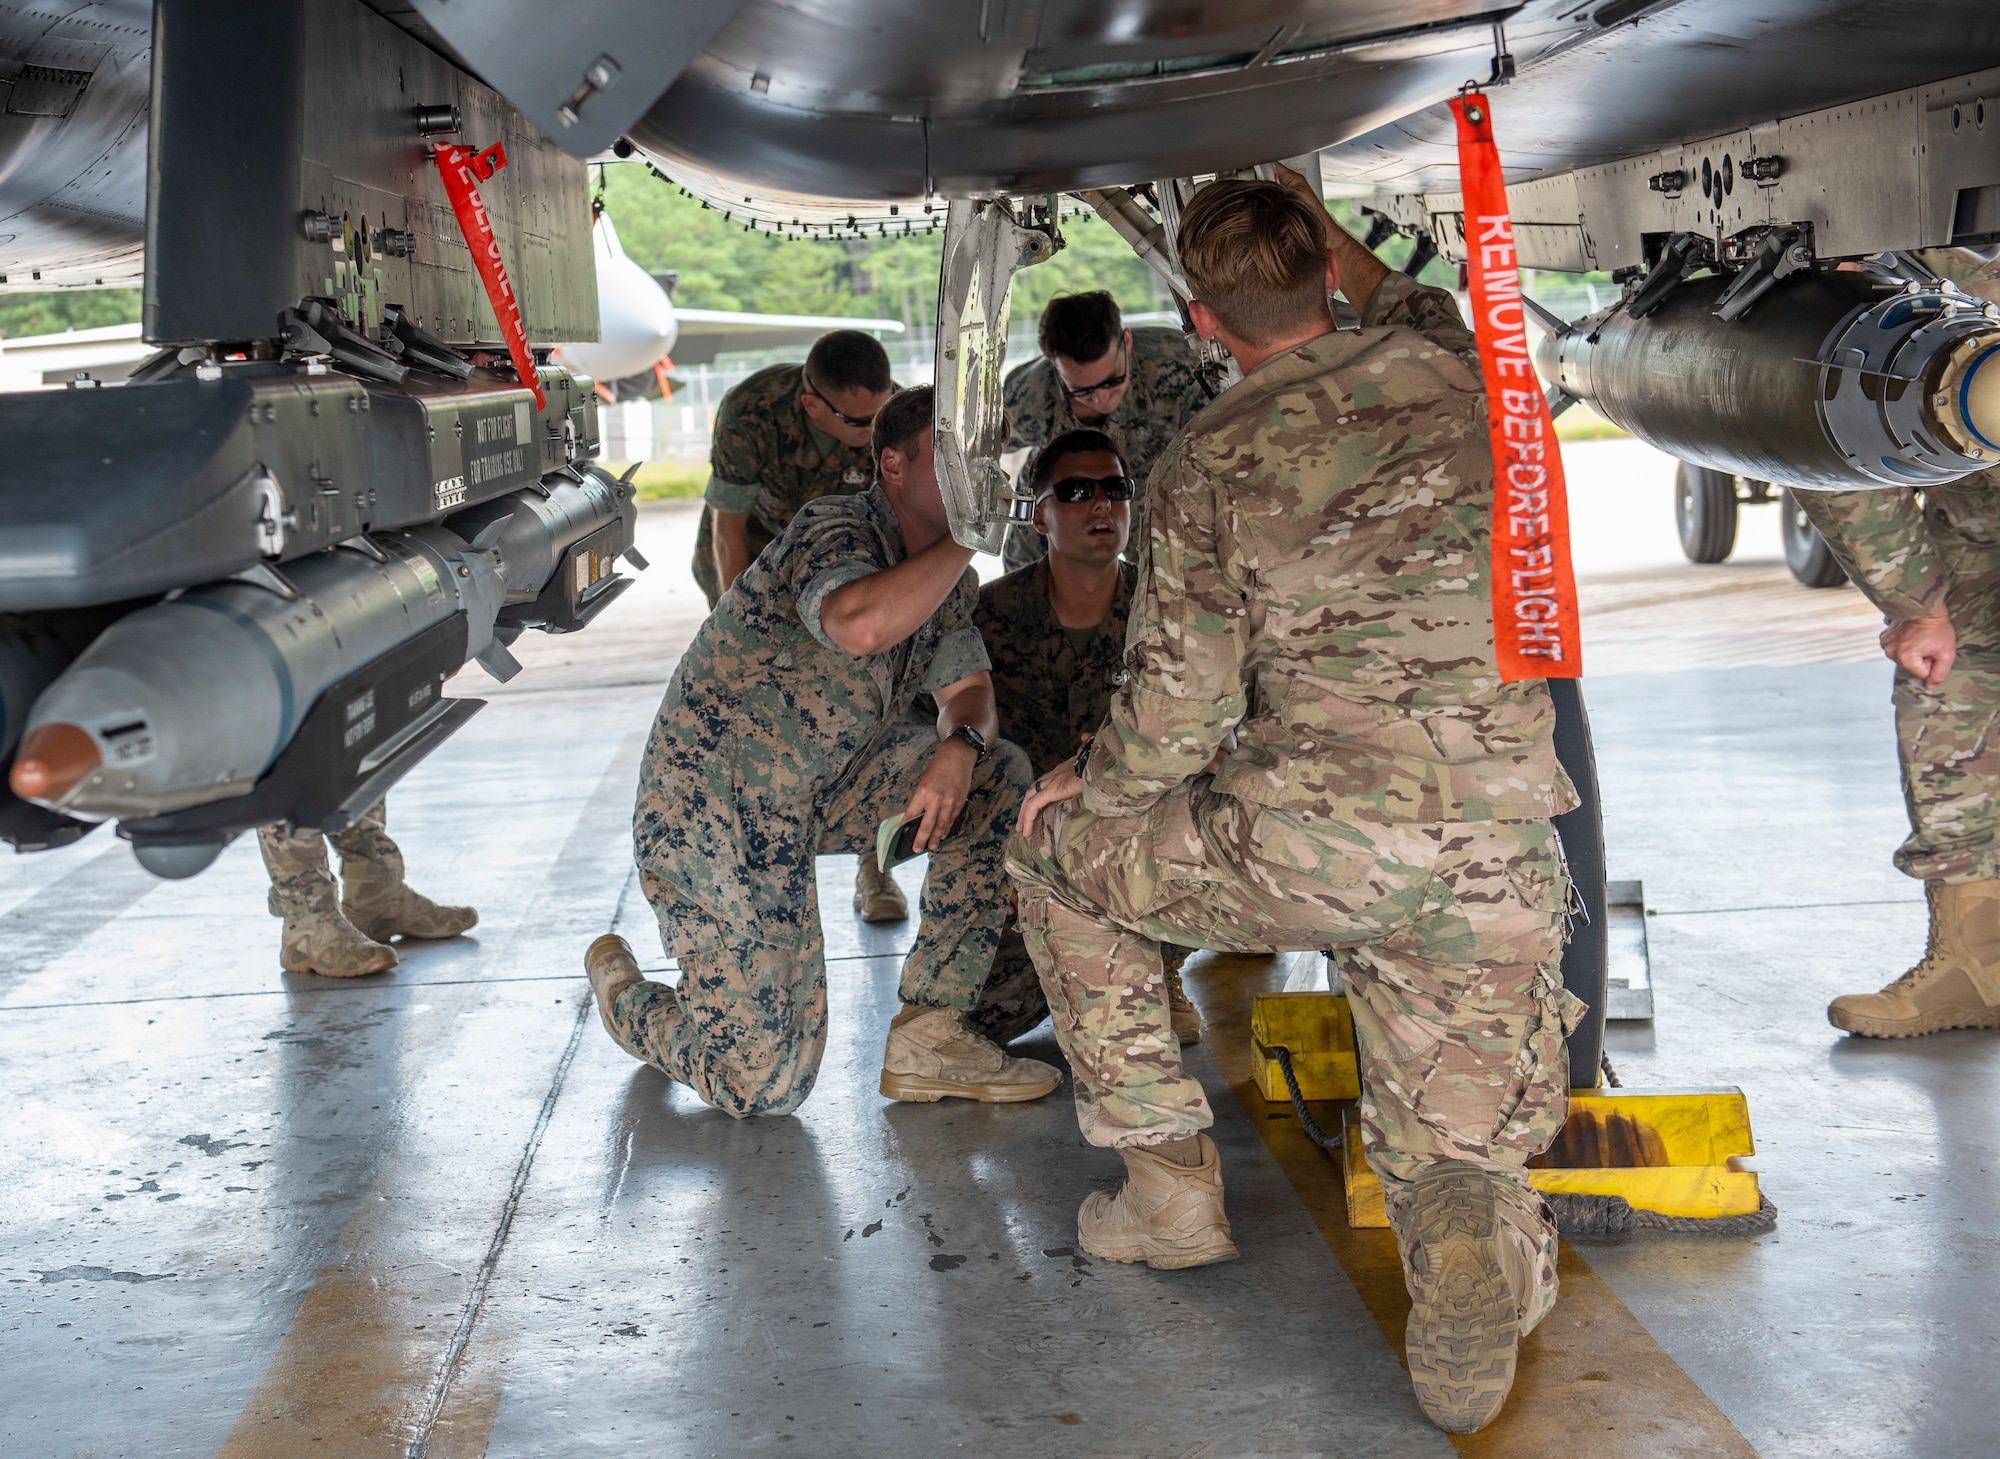 Staff Sgt. Ryan Carel, 4th Civil Engineer Squadron explosive ordnance disposal technician, shows U.S. Marine EOD technicians how to safely pin landing gear on an F-15E Strike Eagle, August 14, 2019, at Seymour Johnson Air Force Base, North Carolina. The Marines, assigned to the 8th Engineer Support Battalion, 2nd Marine Logistics Group, came to Seymour Johnson AFB to become familiar with aircraft weaponry. (U.S. Air Force photo by Senior Airman Kenneth Boyton)